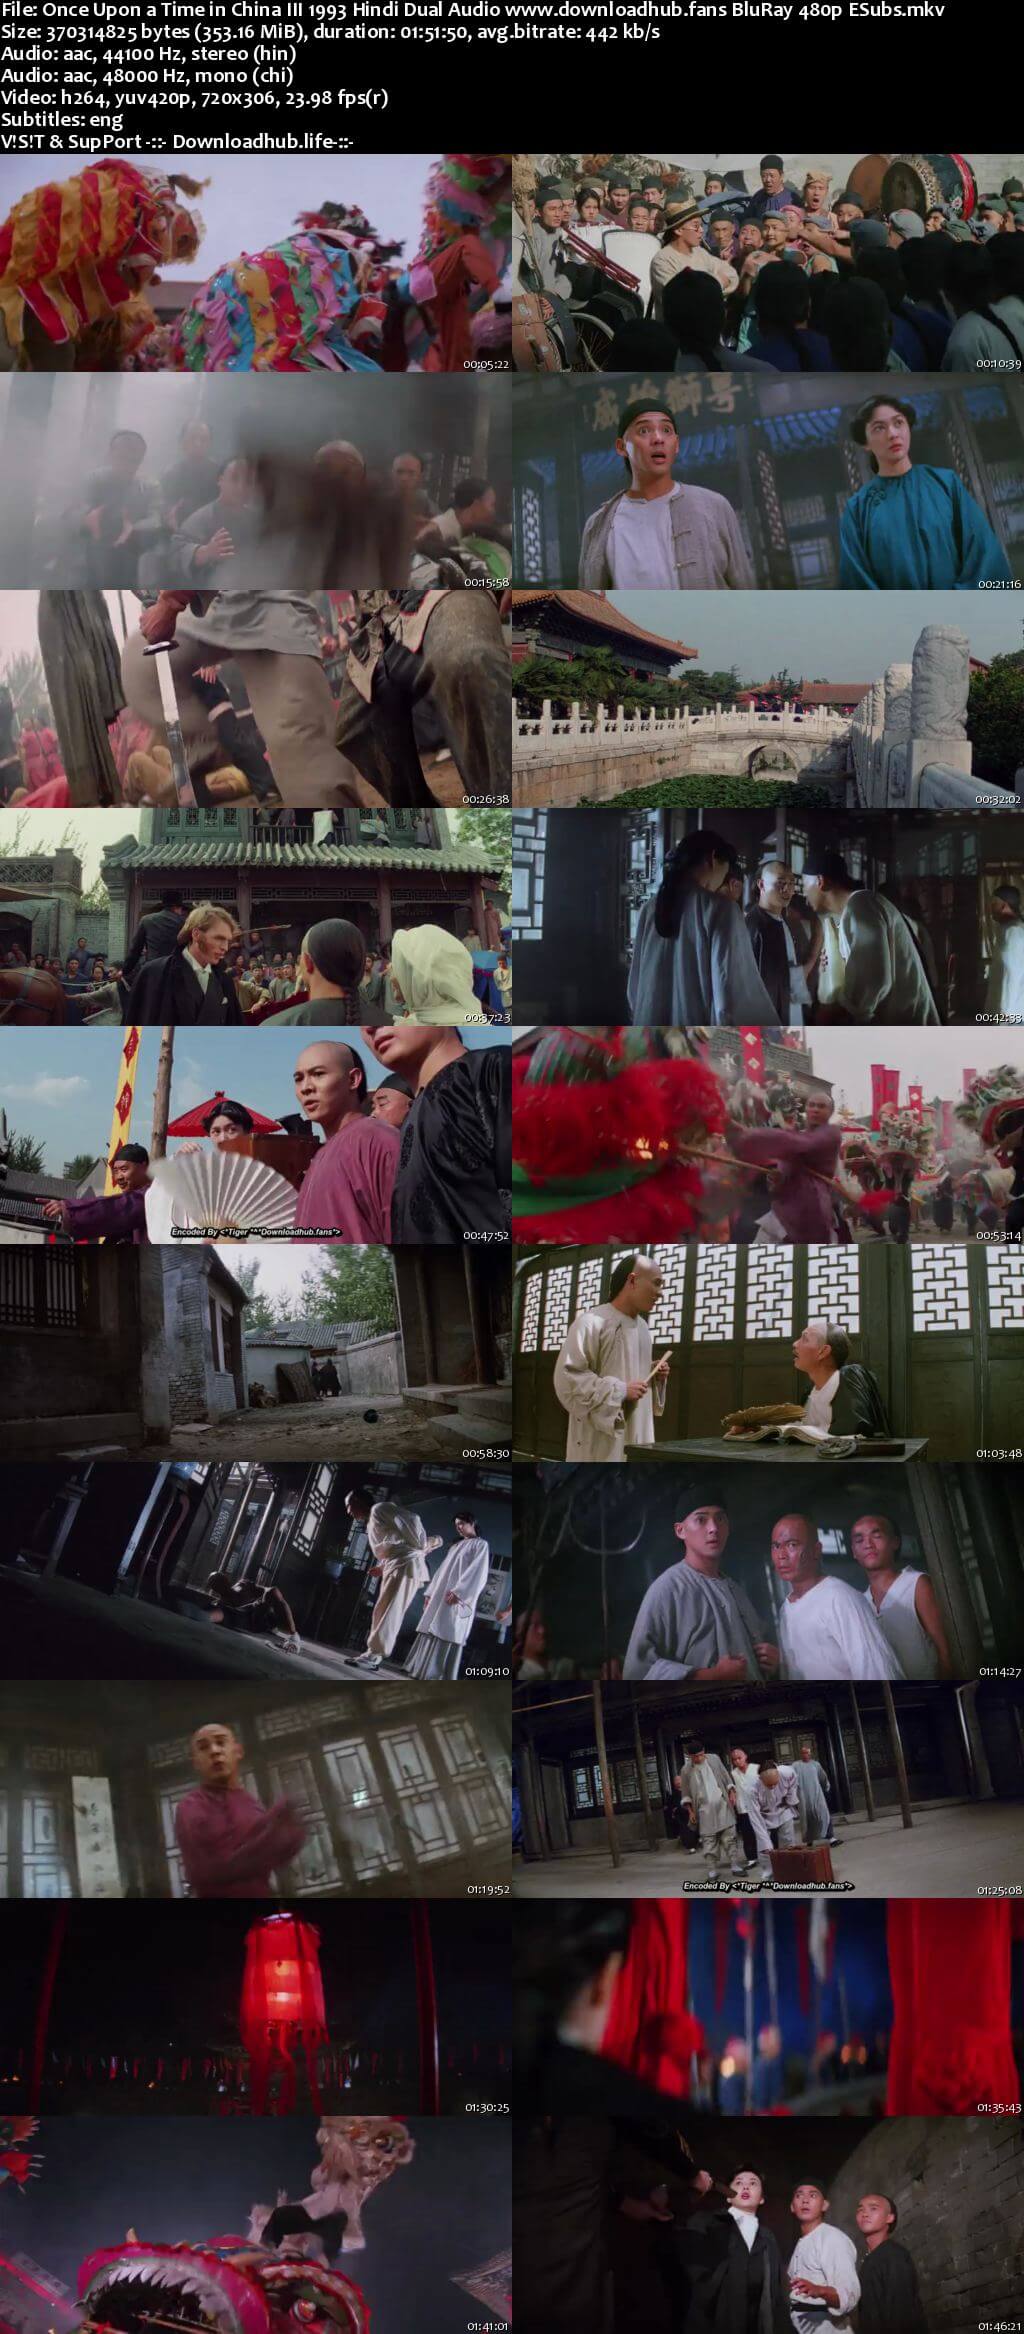 Once Upon a Time in China III 1993 Hindi Dual Audio 350MB BluRay 480p ESubs